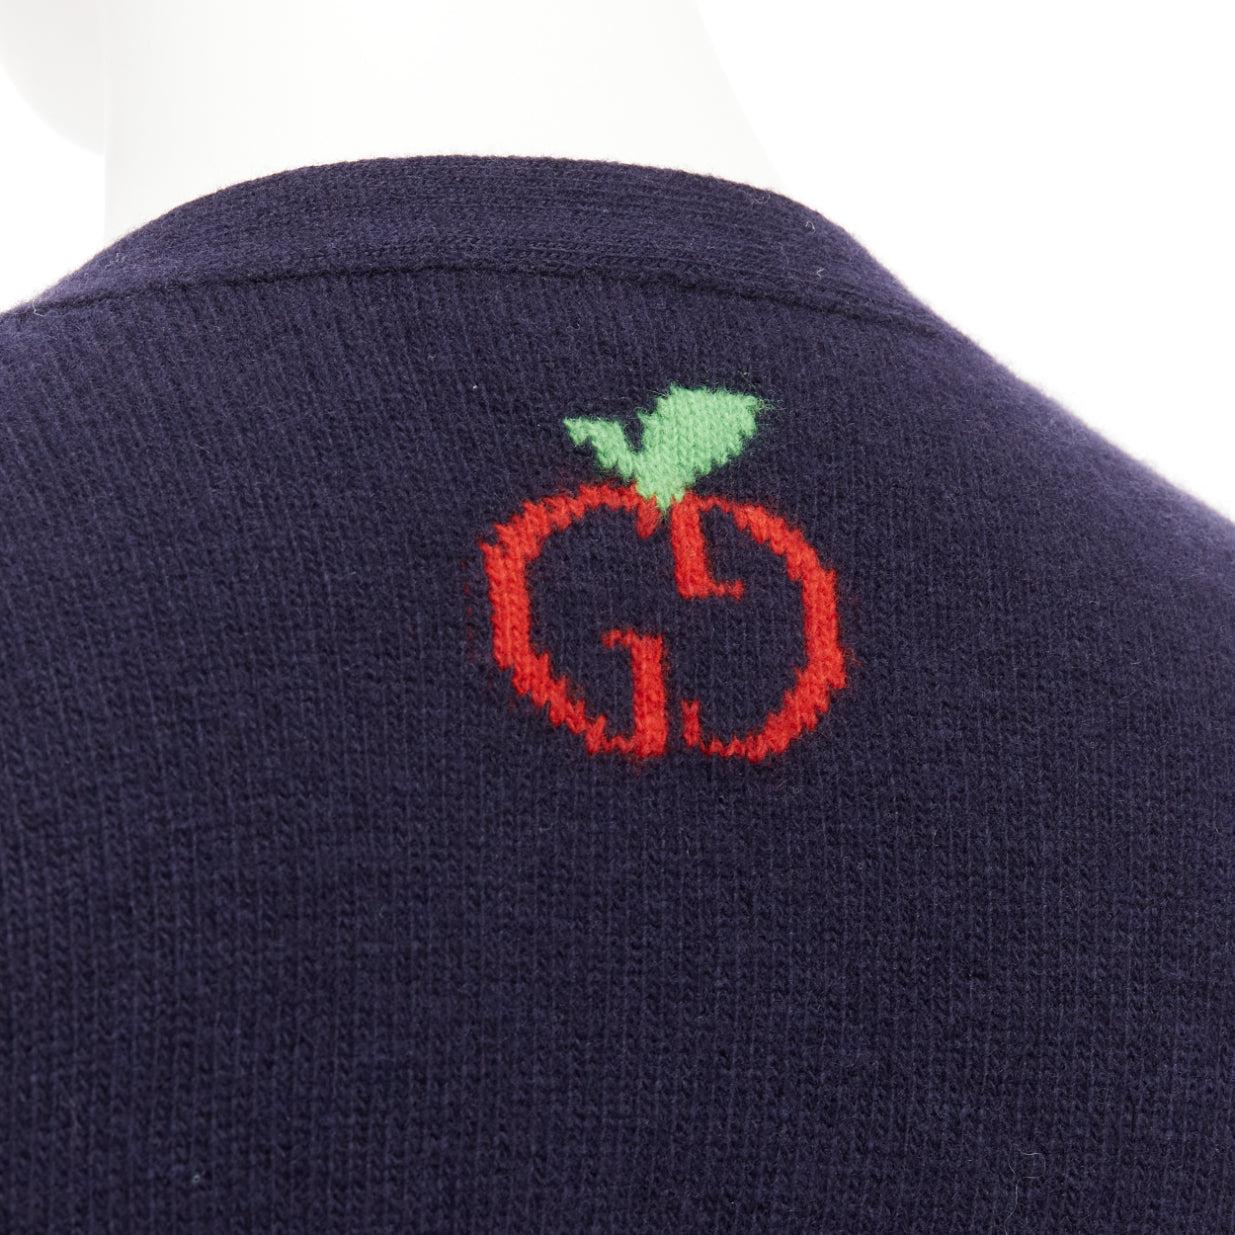 GUCCI Kids 100% Wolle marineblauer und roter Apfel GG Logo Strickjacke Pullover 12Y XS
Referenz: KYCG/A00020
Marke: Gucci
Designer: Alessandro Michele
Collection'S: Kinder
MATERIAL: Wolle
Farbe: Marineblau, Rot
Muster: Apfel
Verschluss: